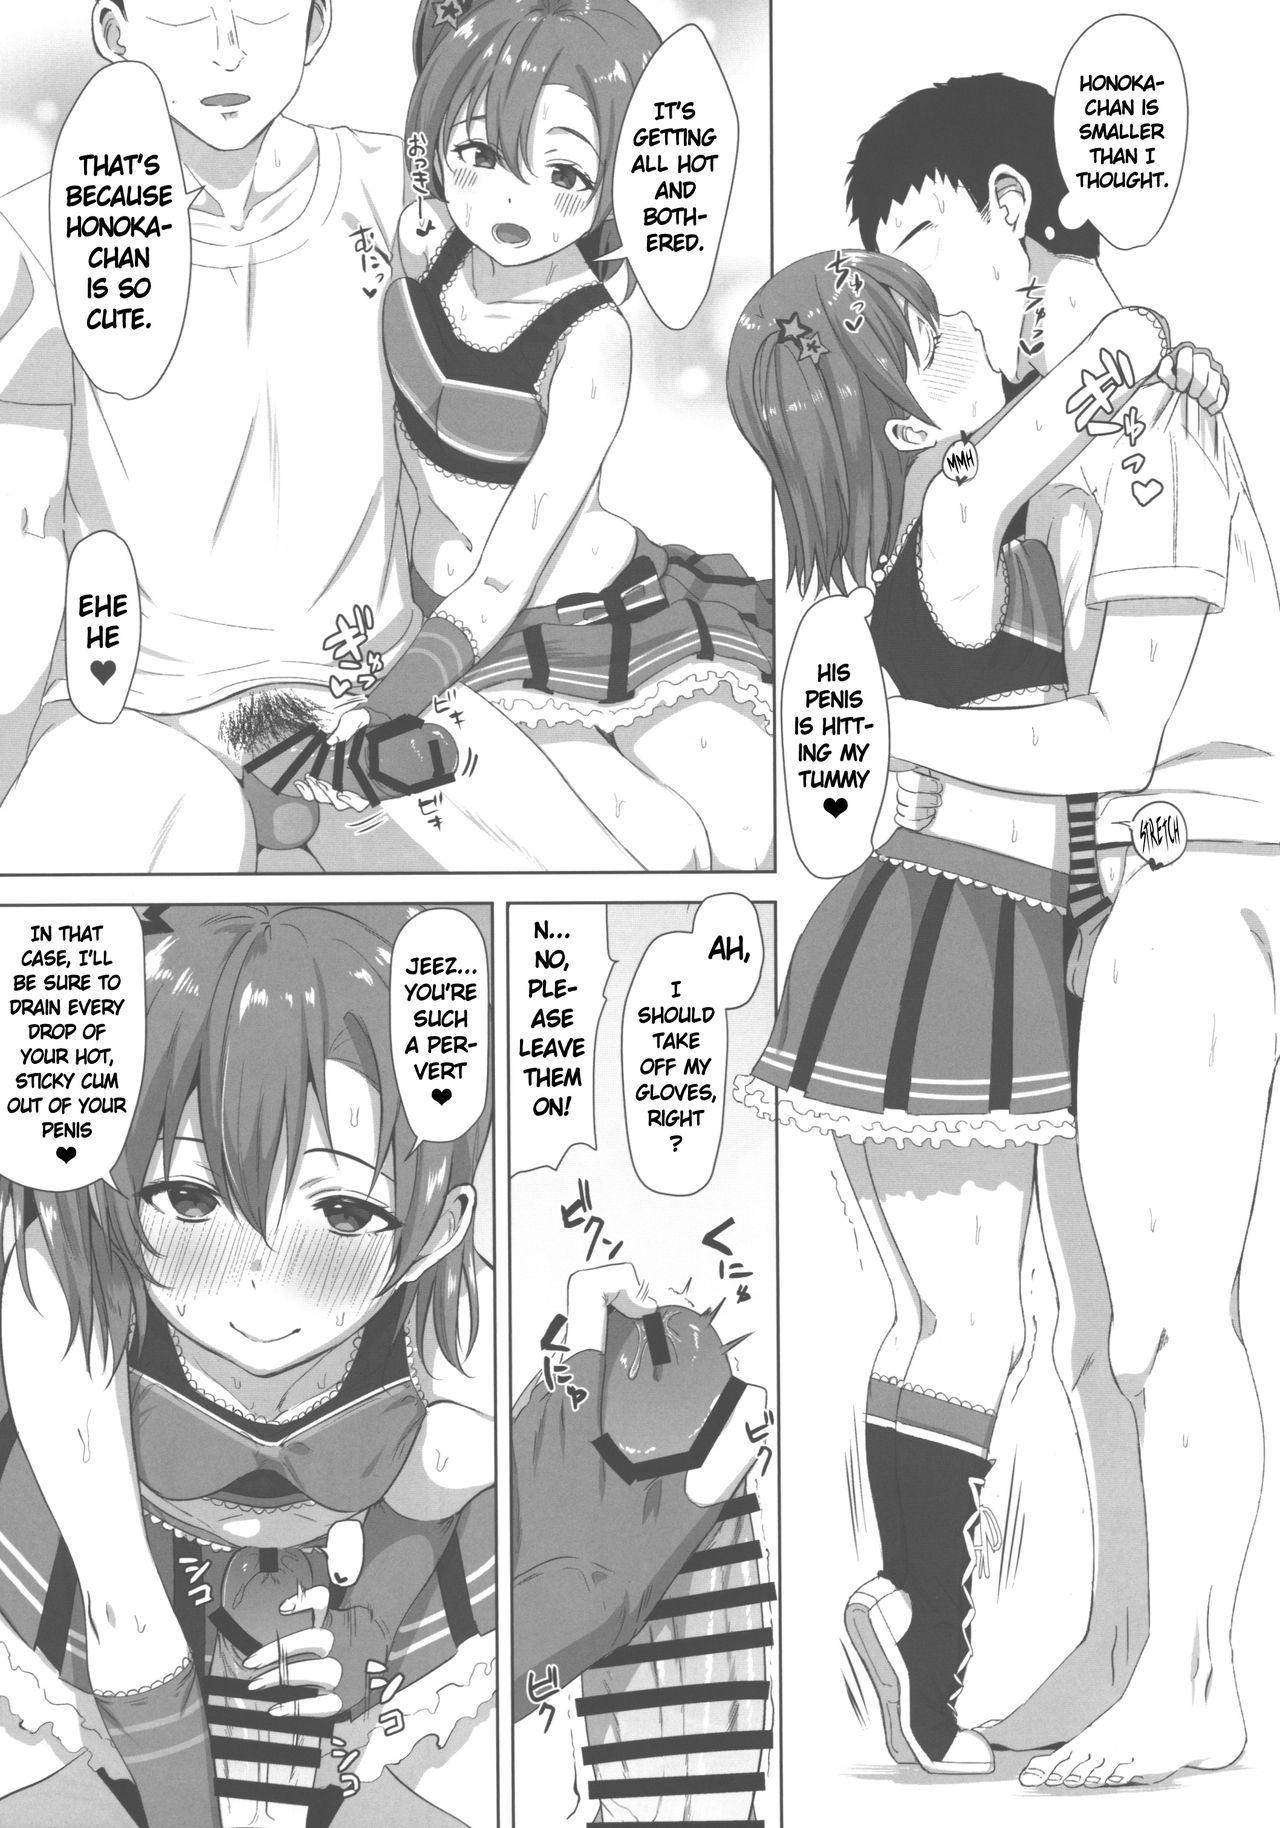 Sex Toys CheerSex CheerGirl! - Love live Maledom - Page 5